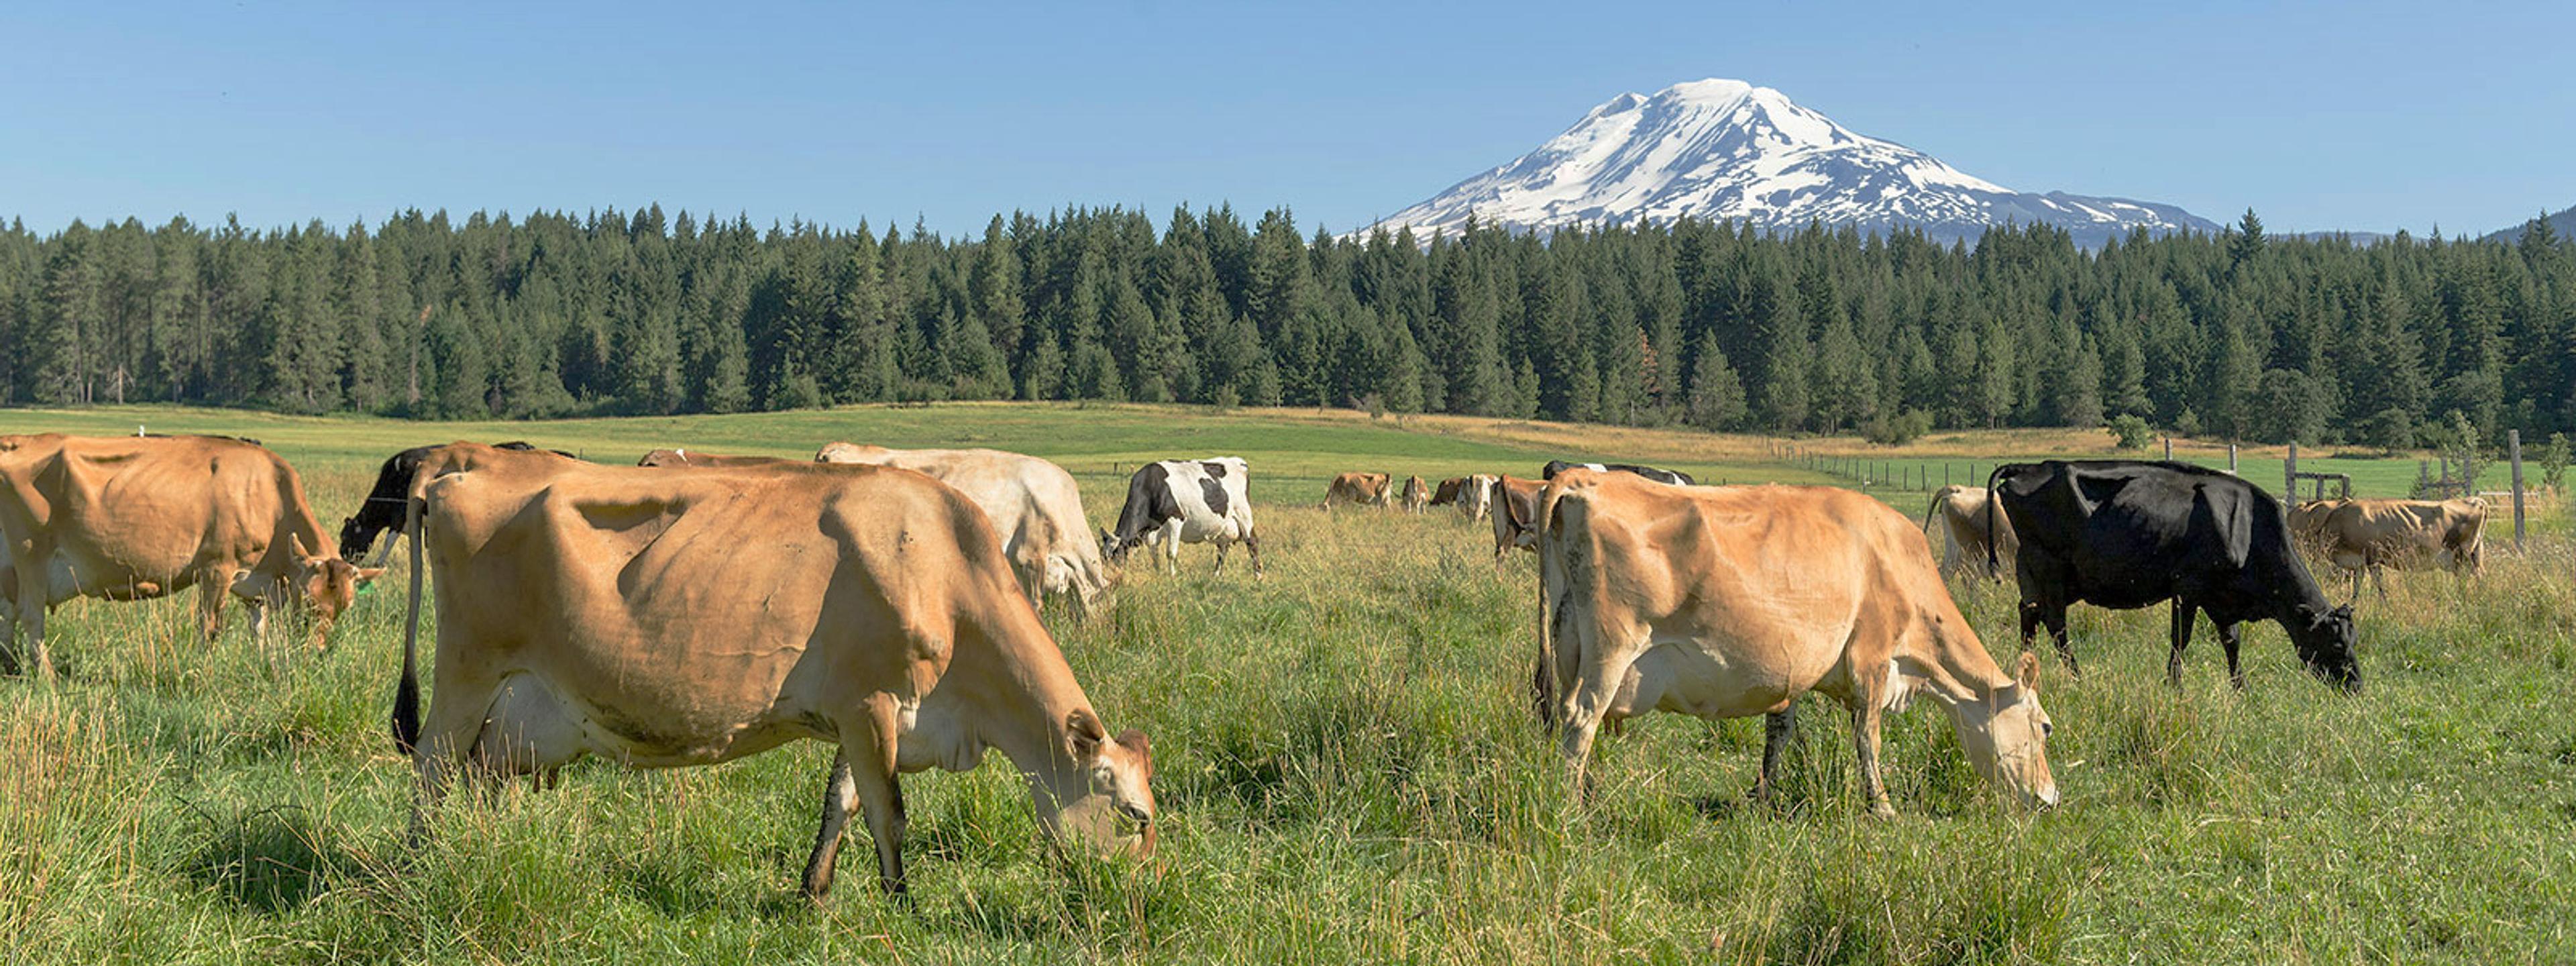 Jersey cows graze with a view of a snow capped mountain in Washington.